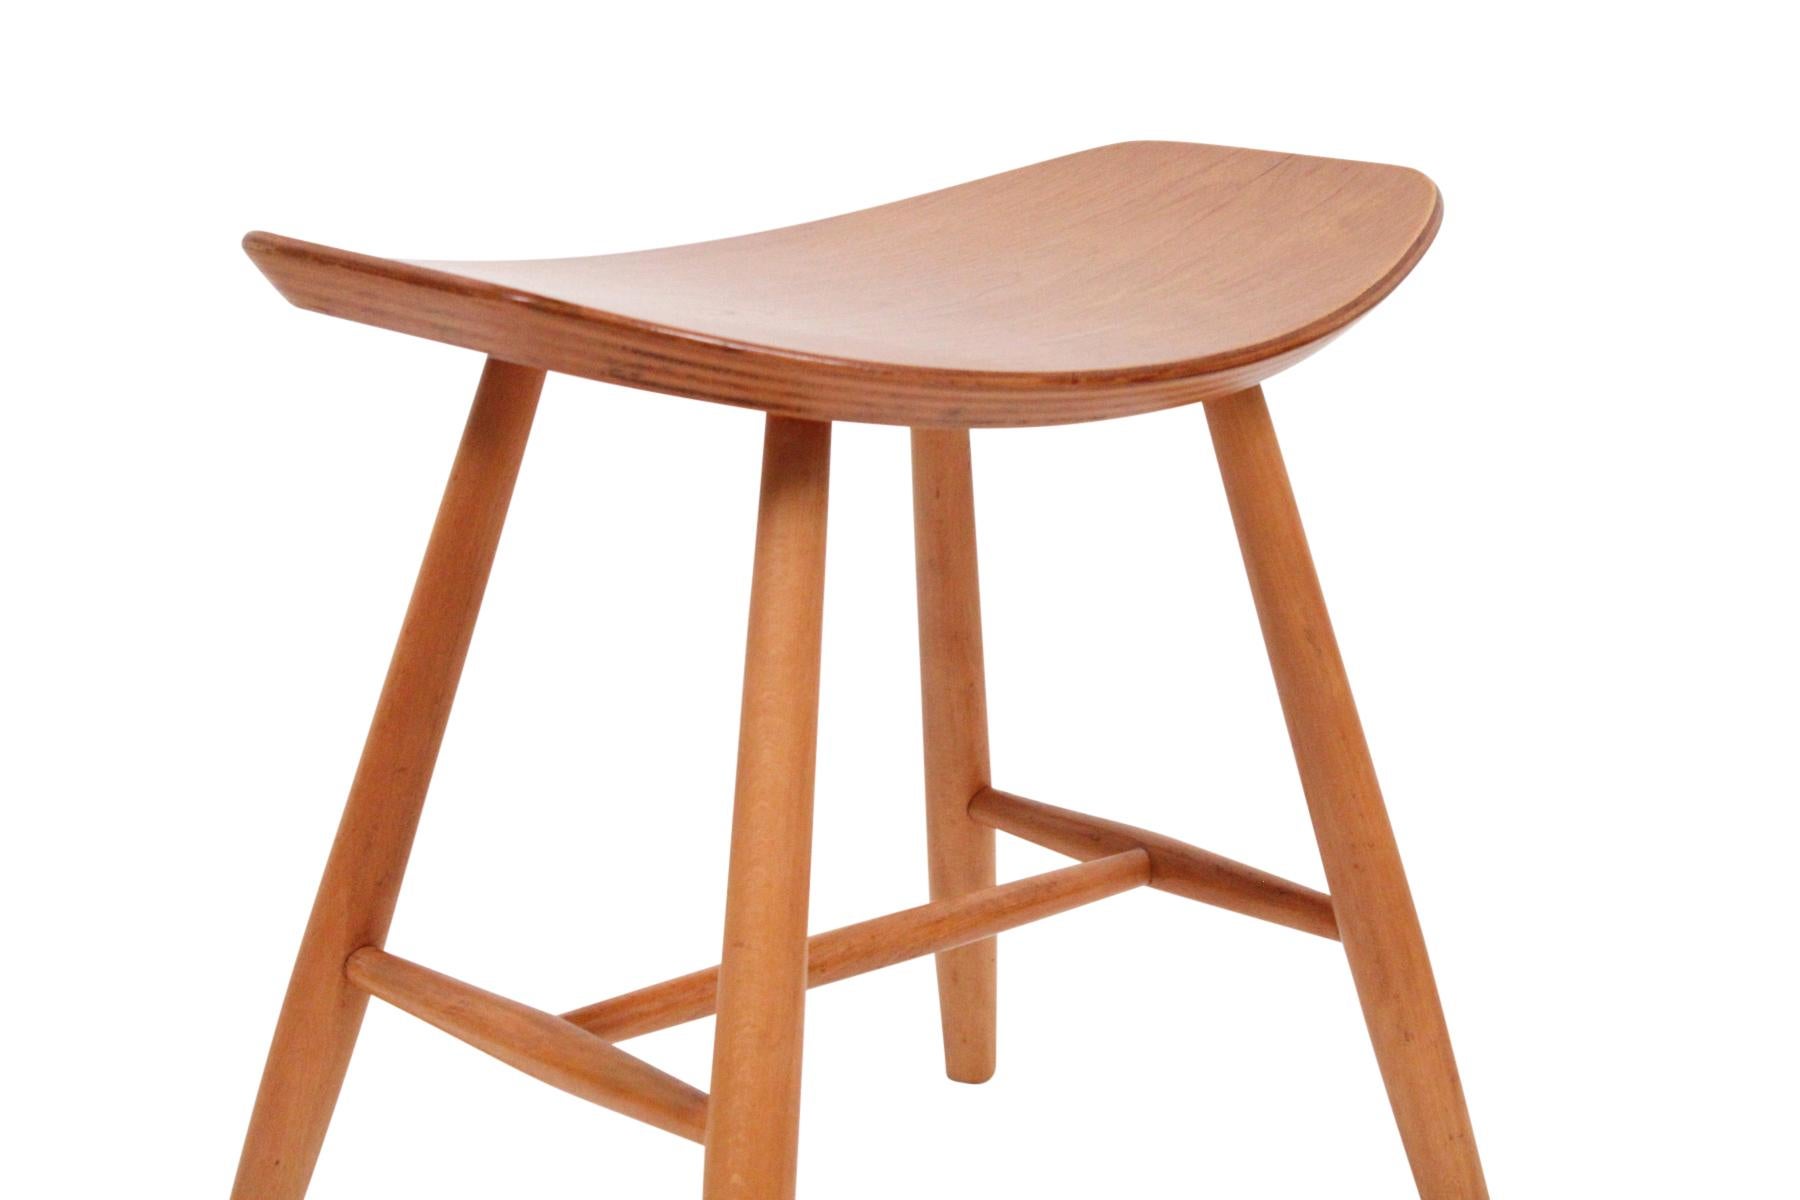 Mid-20th Century Stool by Ejvind Johansson for FDB Mobler